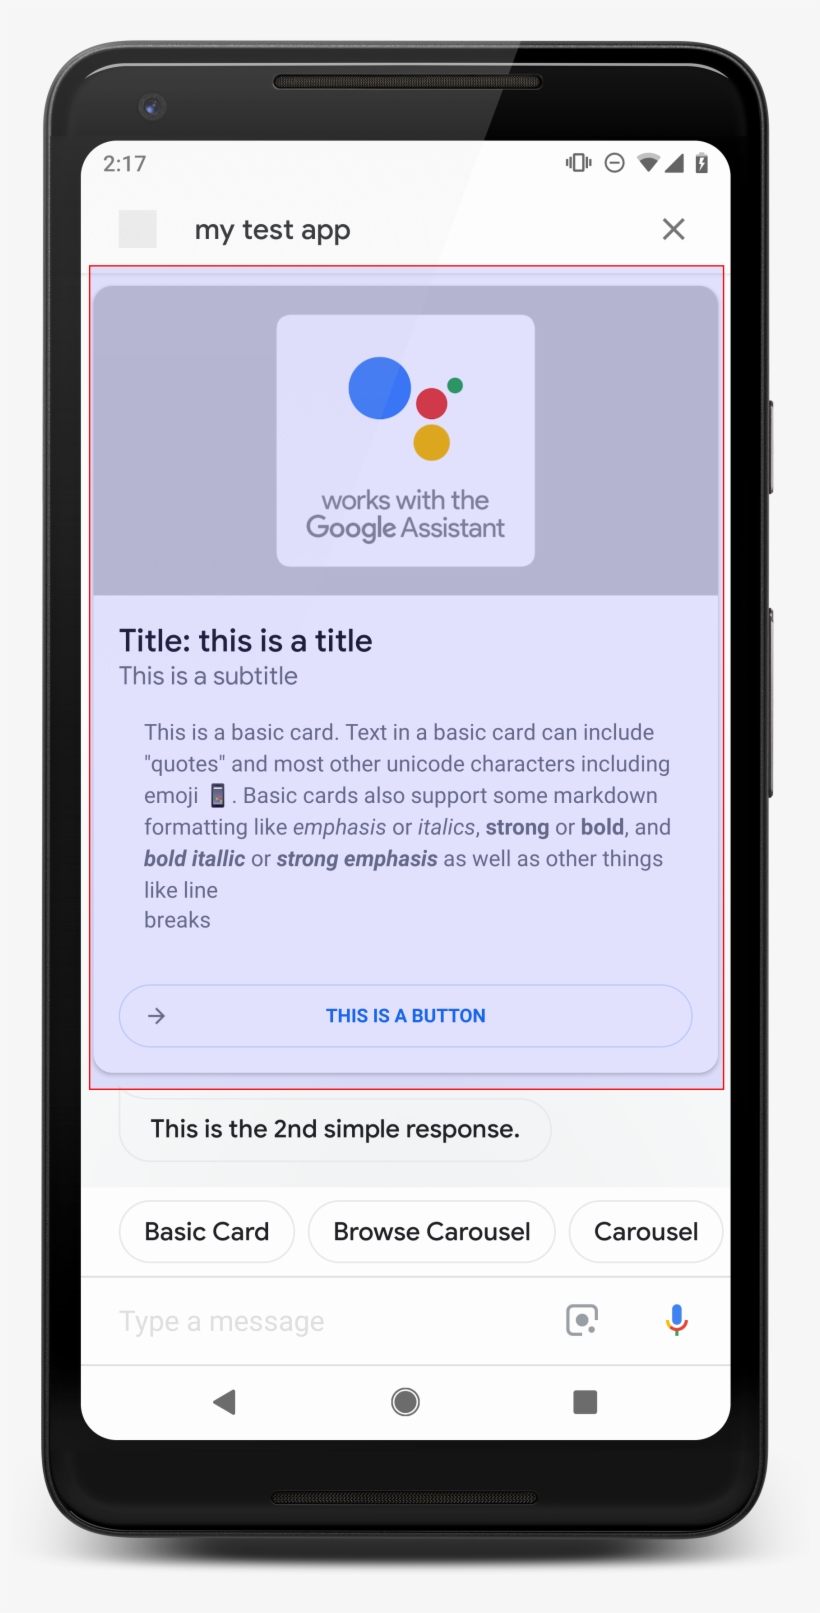 A Basic Card Displays Information That Can Include - Google Assistant, transparent png #4376721